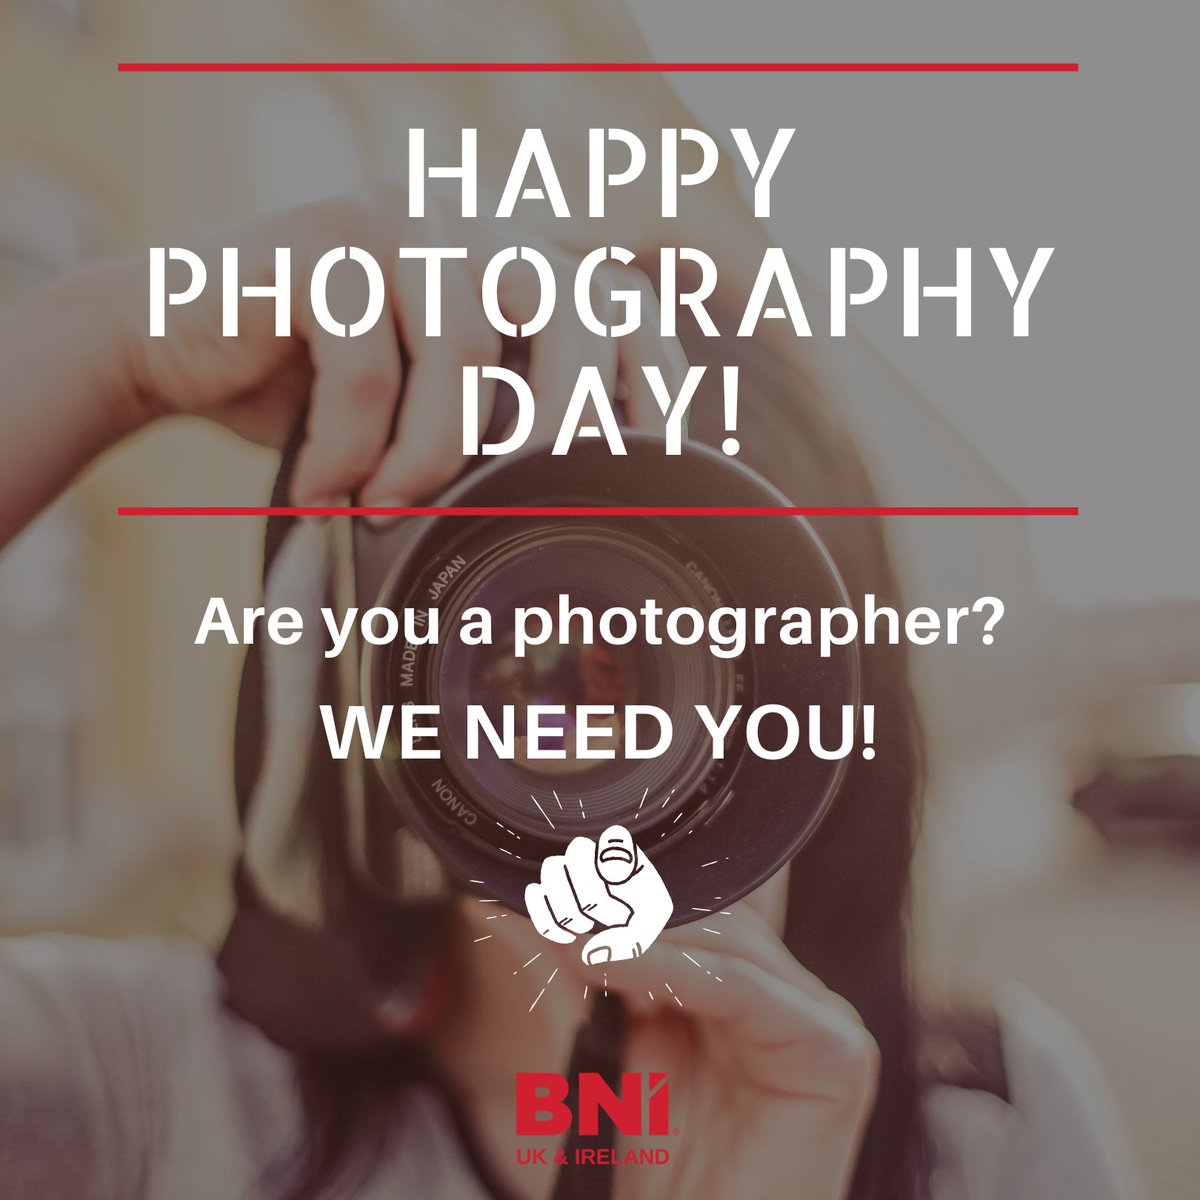 So on World Photography Day, let us celebrate all the amazingly talented and creative photographers we have in our network. We would love to see one example of your work in our comments and please do tag your company in too. #WorldPhotographyDay